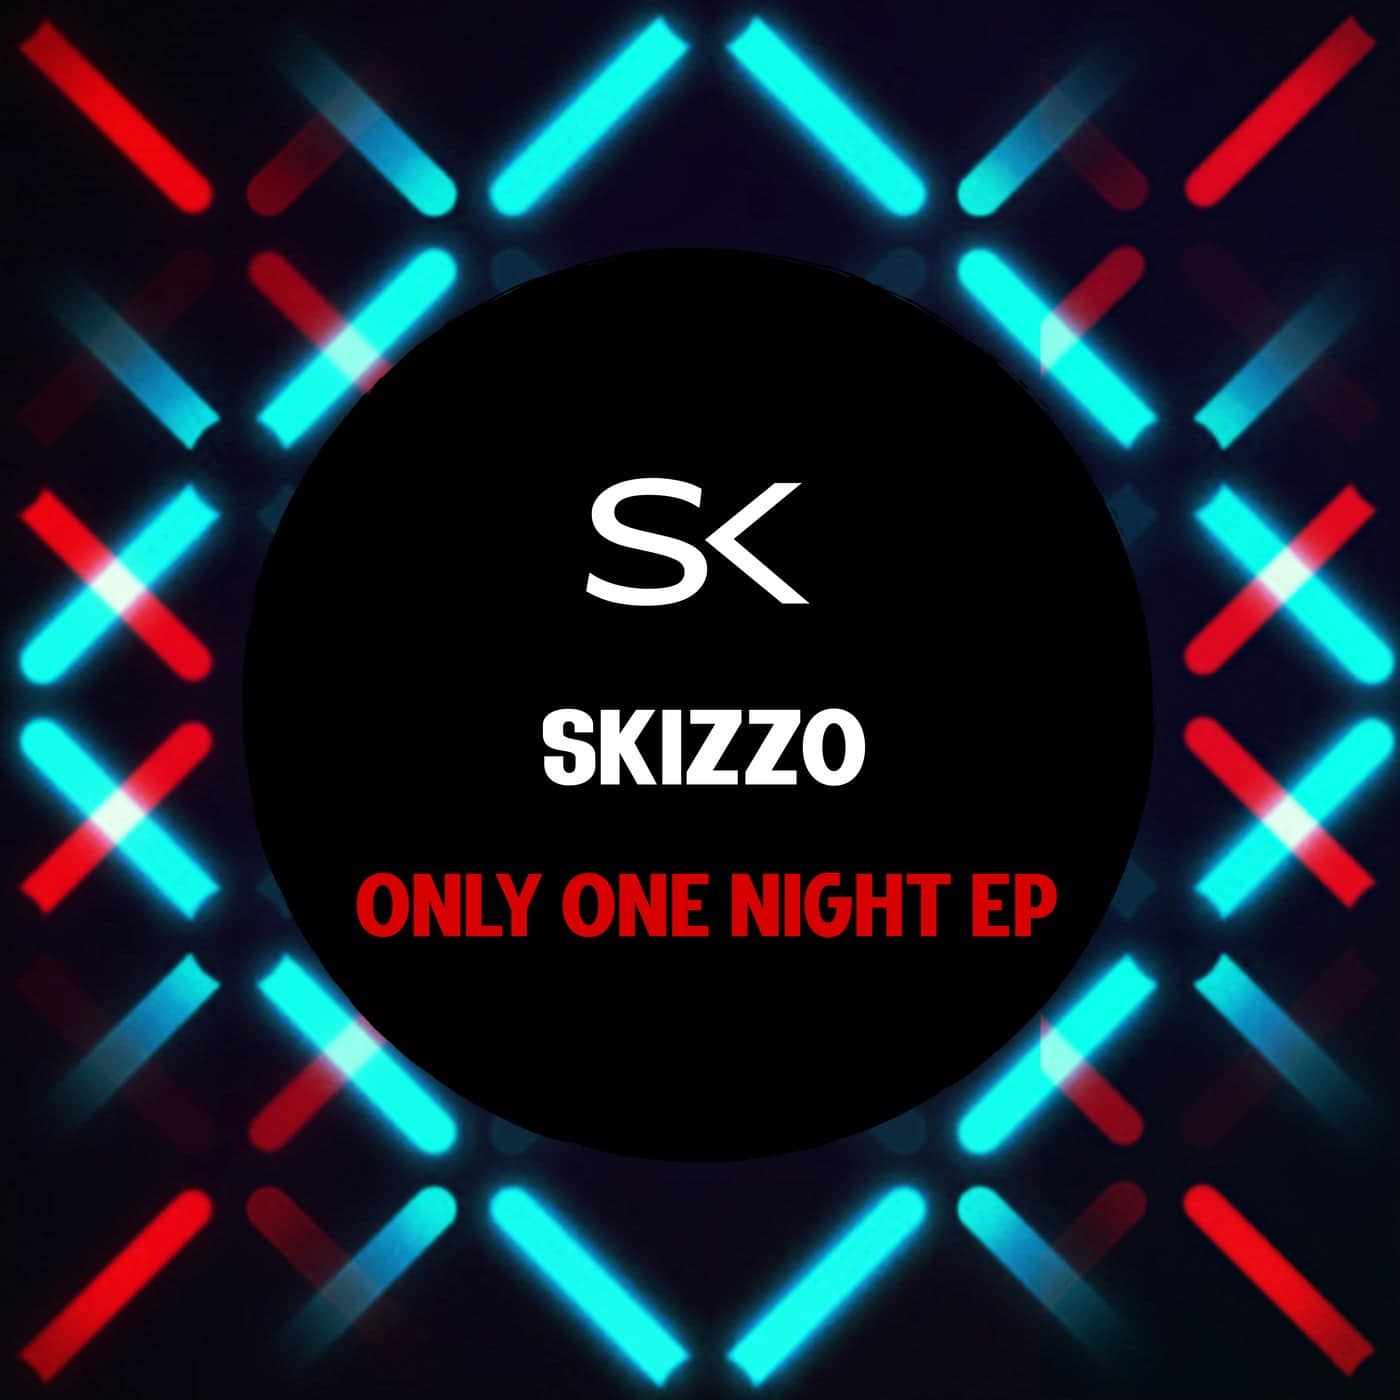 Release Cover: Only One Night Download Free on Electrobuzz